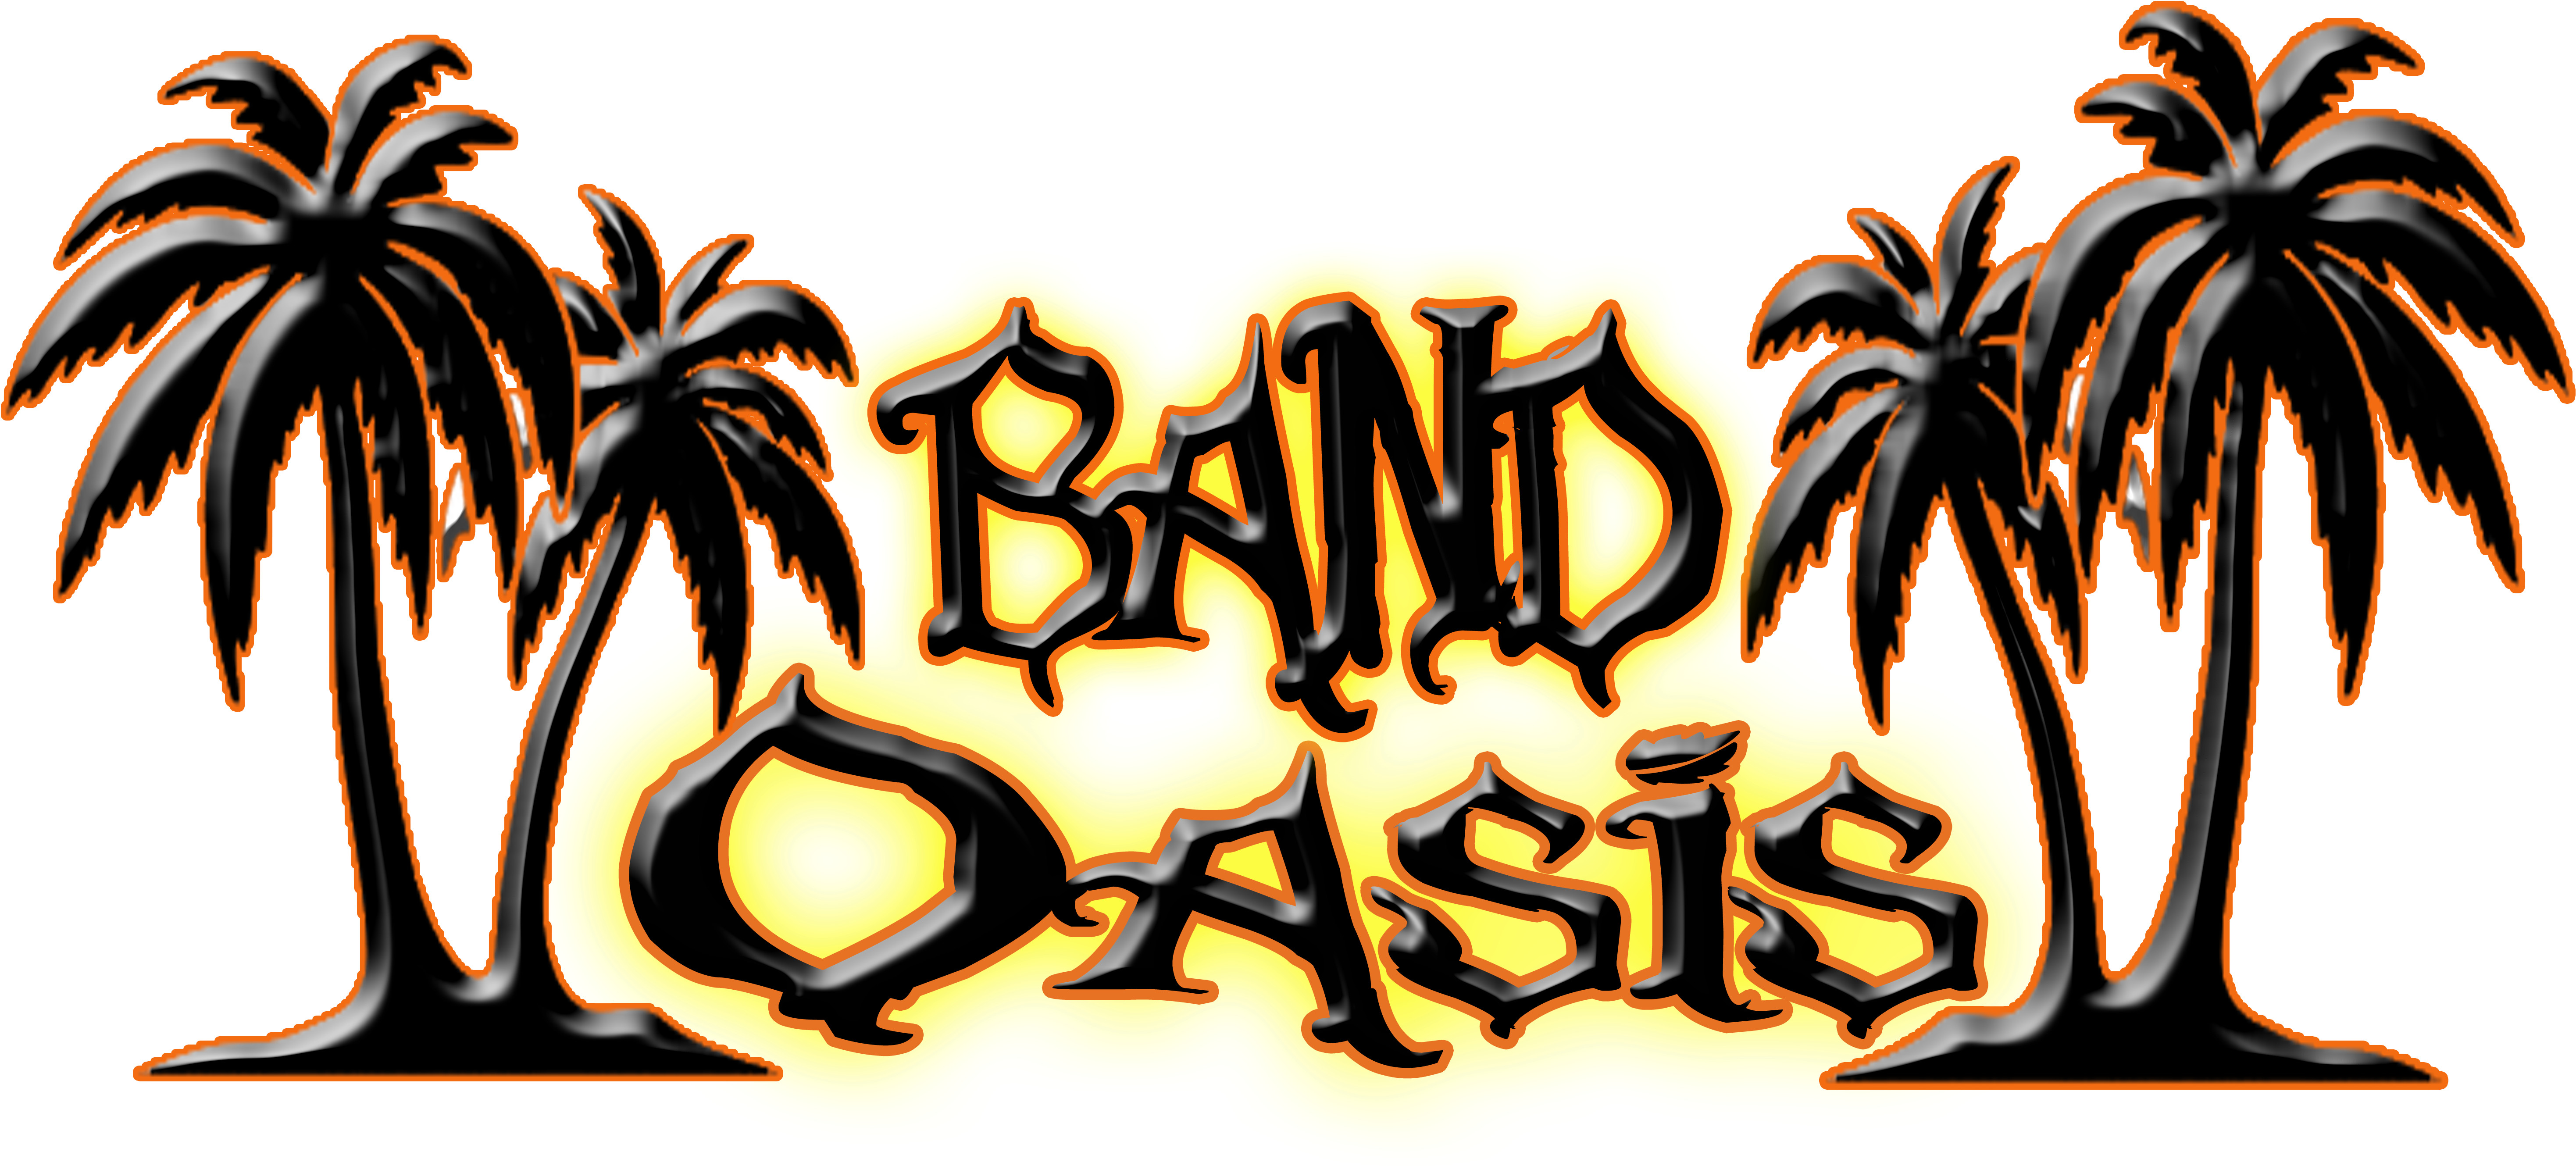 Band Oasis Band Rehearsal Studios - Tropical Palm Trees Decal Sticker (black, 14 Inch) (6600x3252)